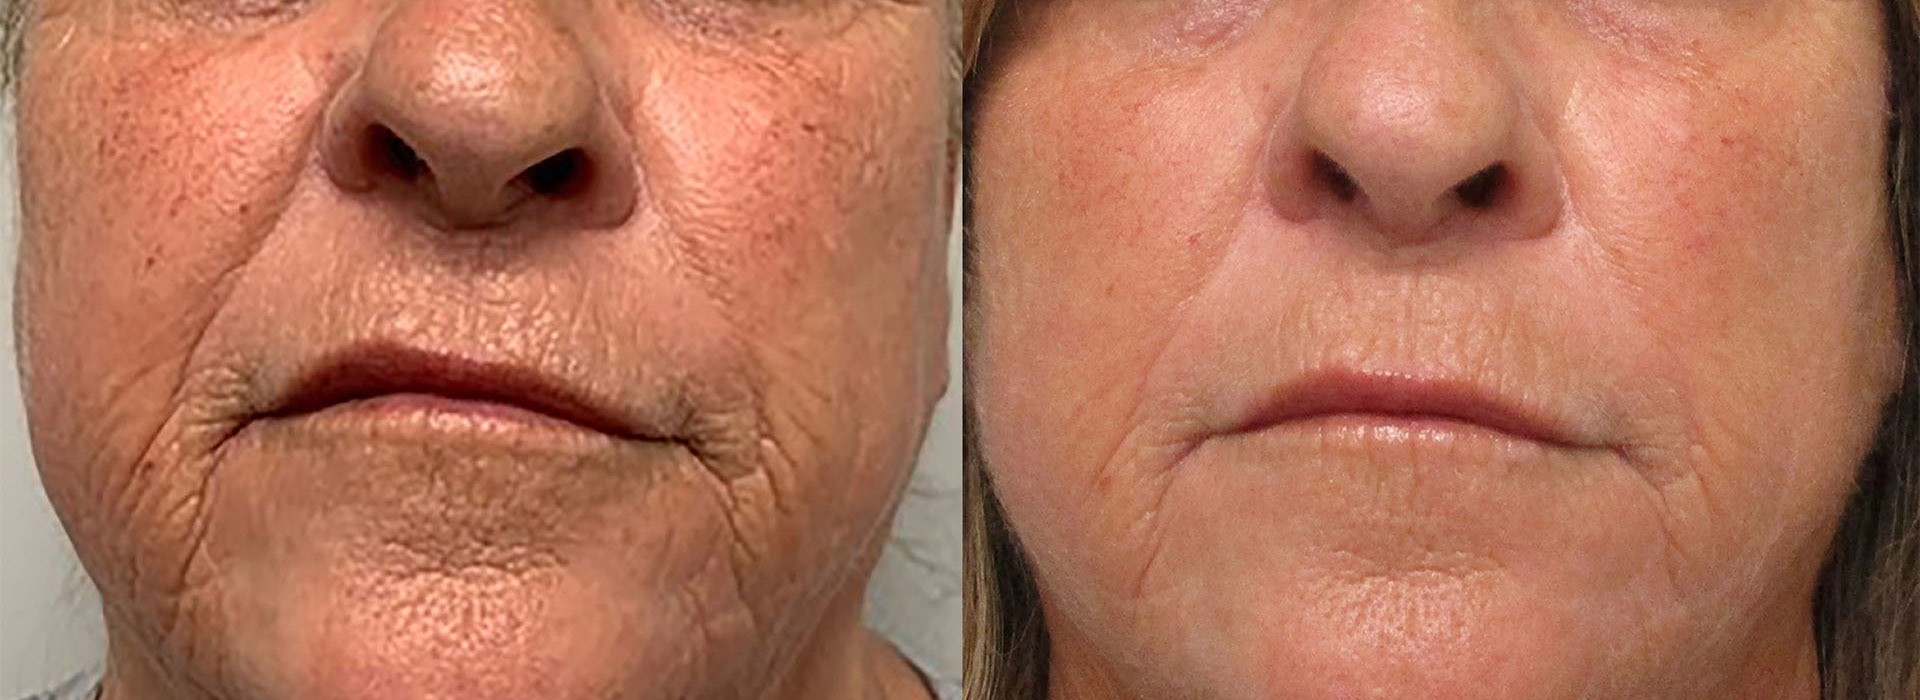 Anti-aging treatment before and after face